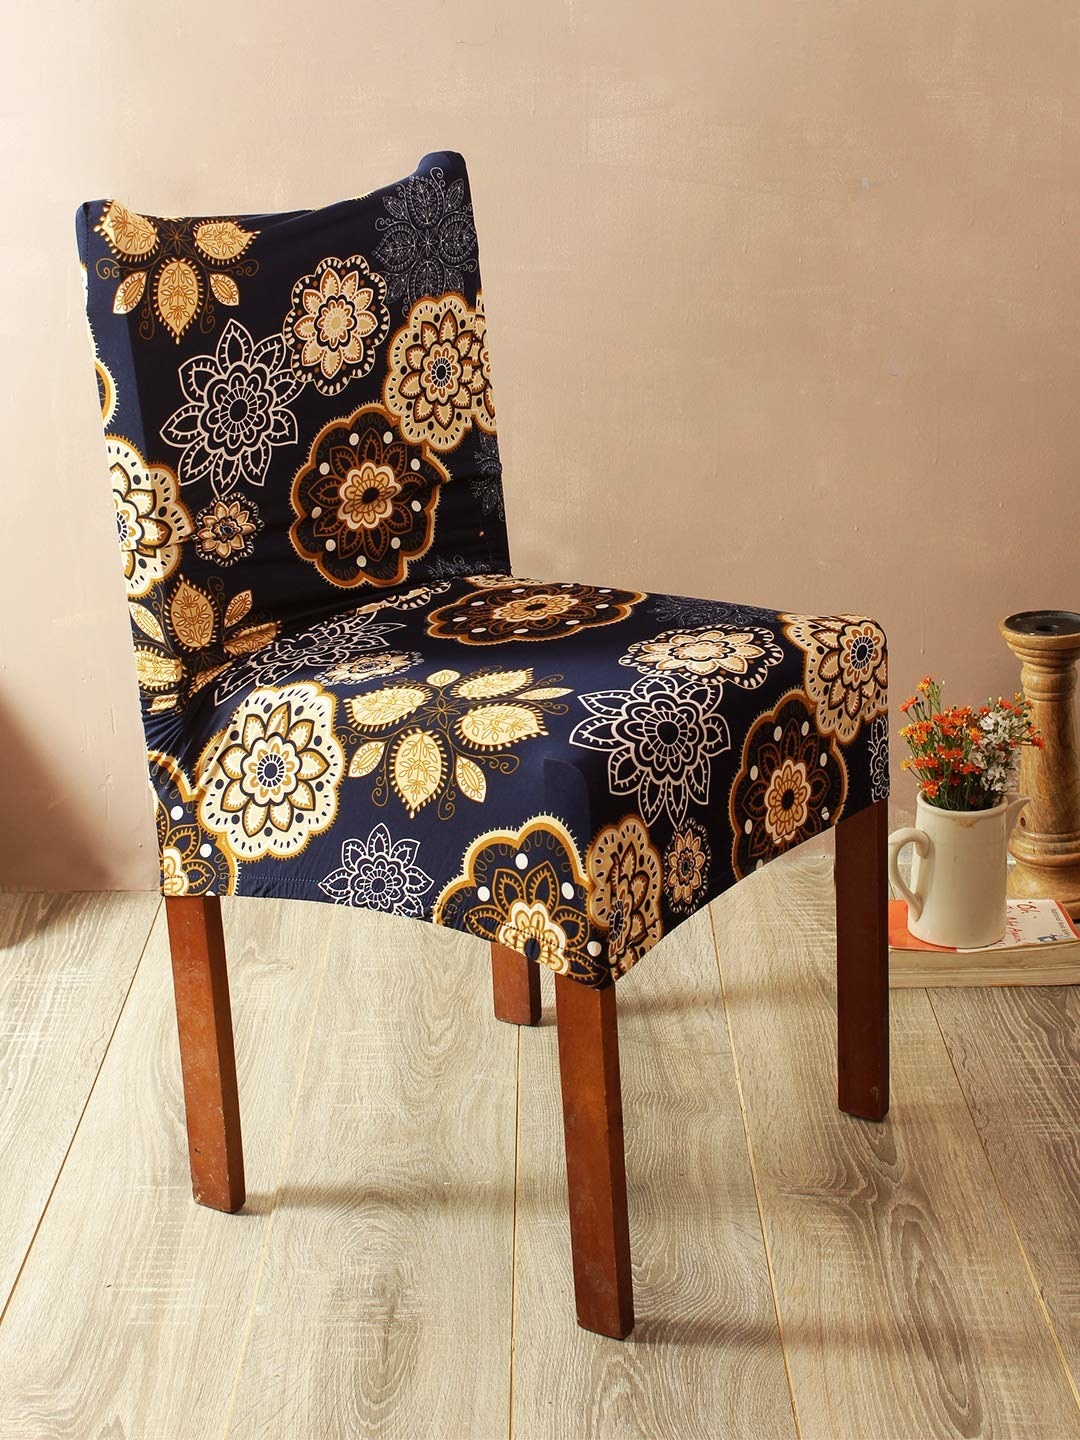 A floral chair cover